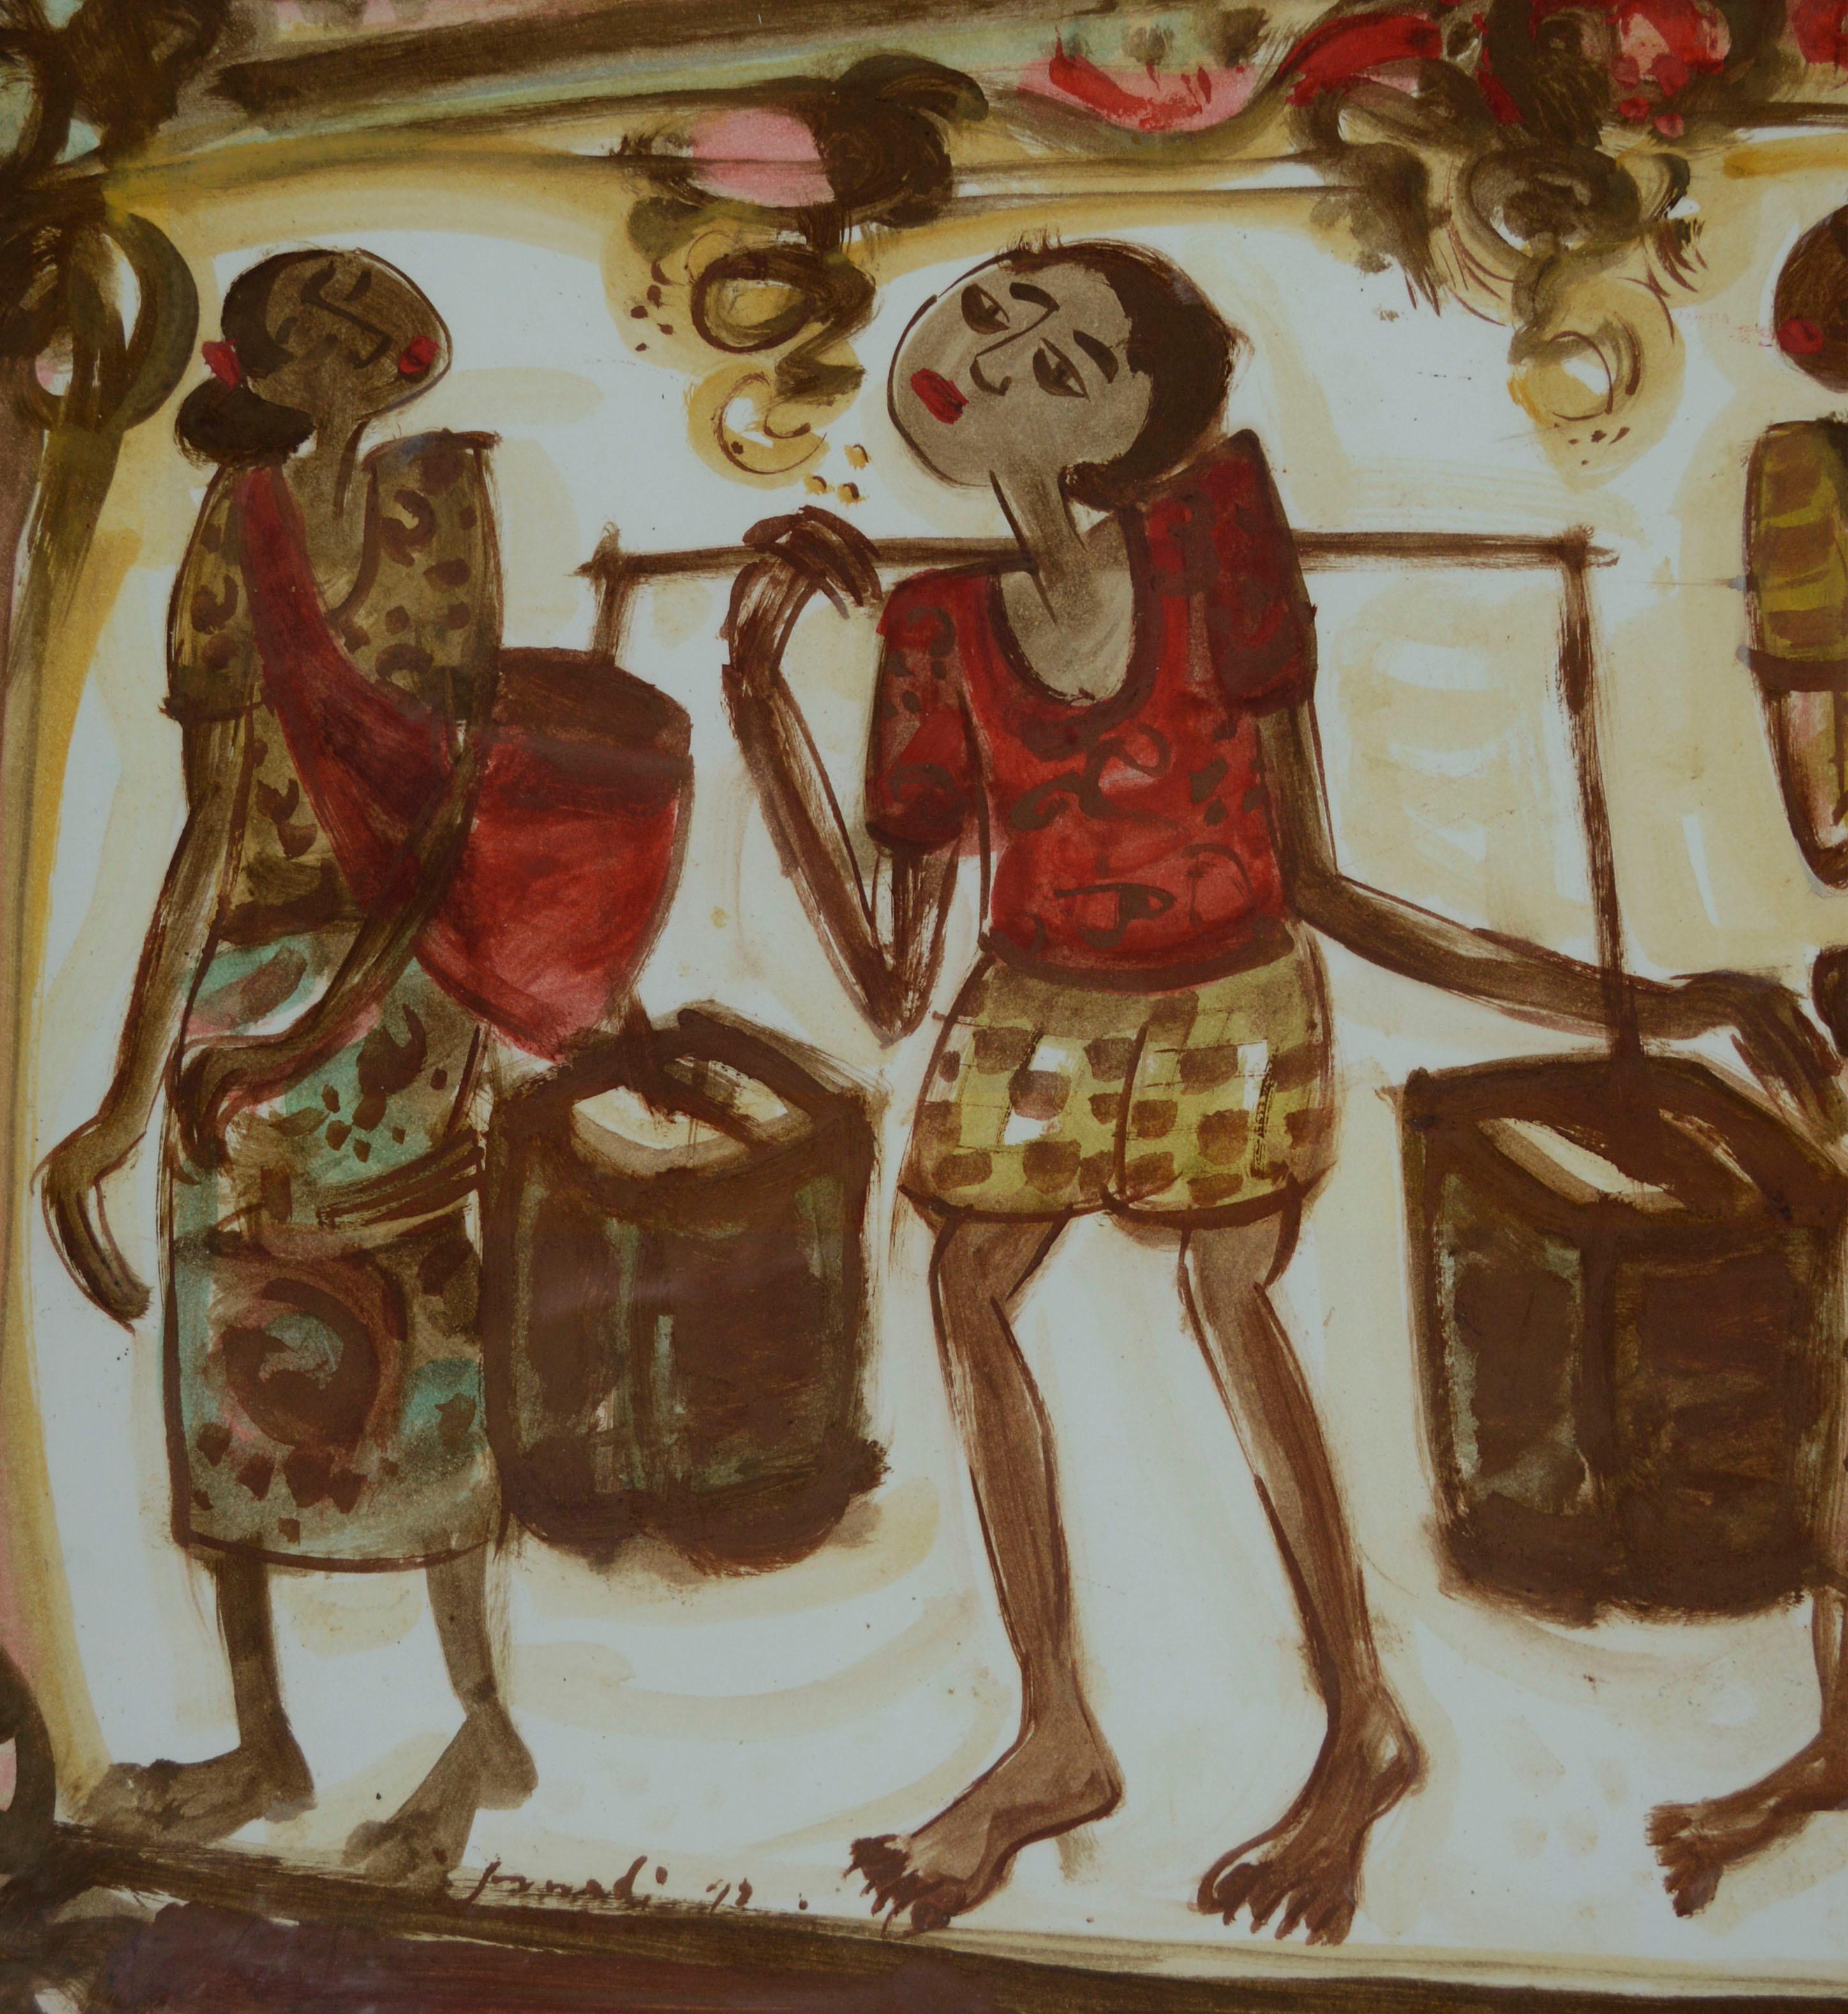 Women Carrying Baskets with Children, Figurative Gouache on Paper  - Brown Figurative Art by Unknown